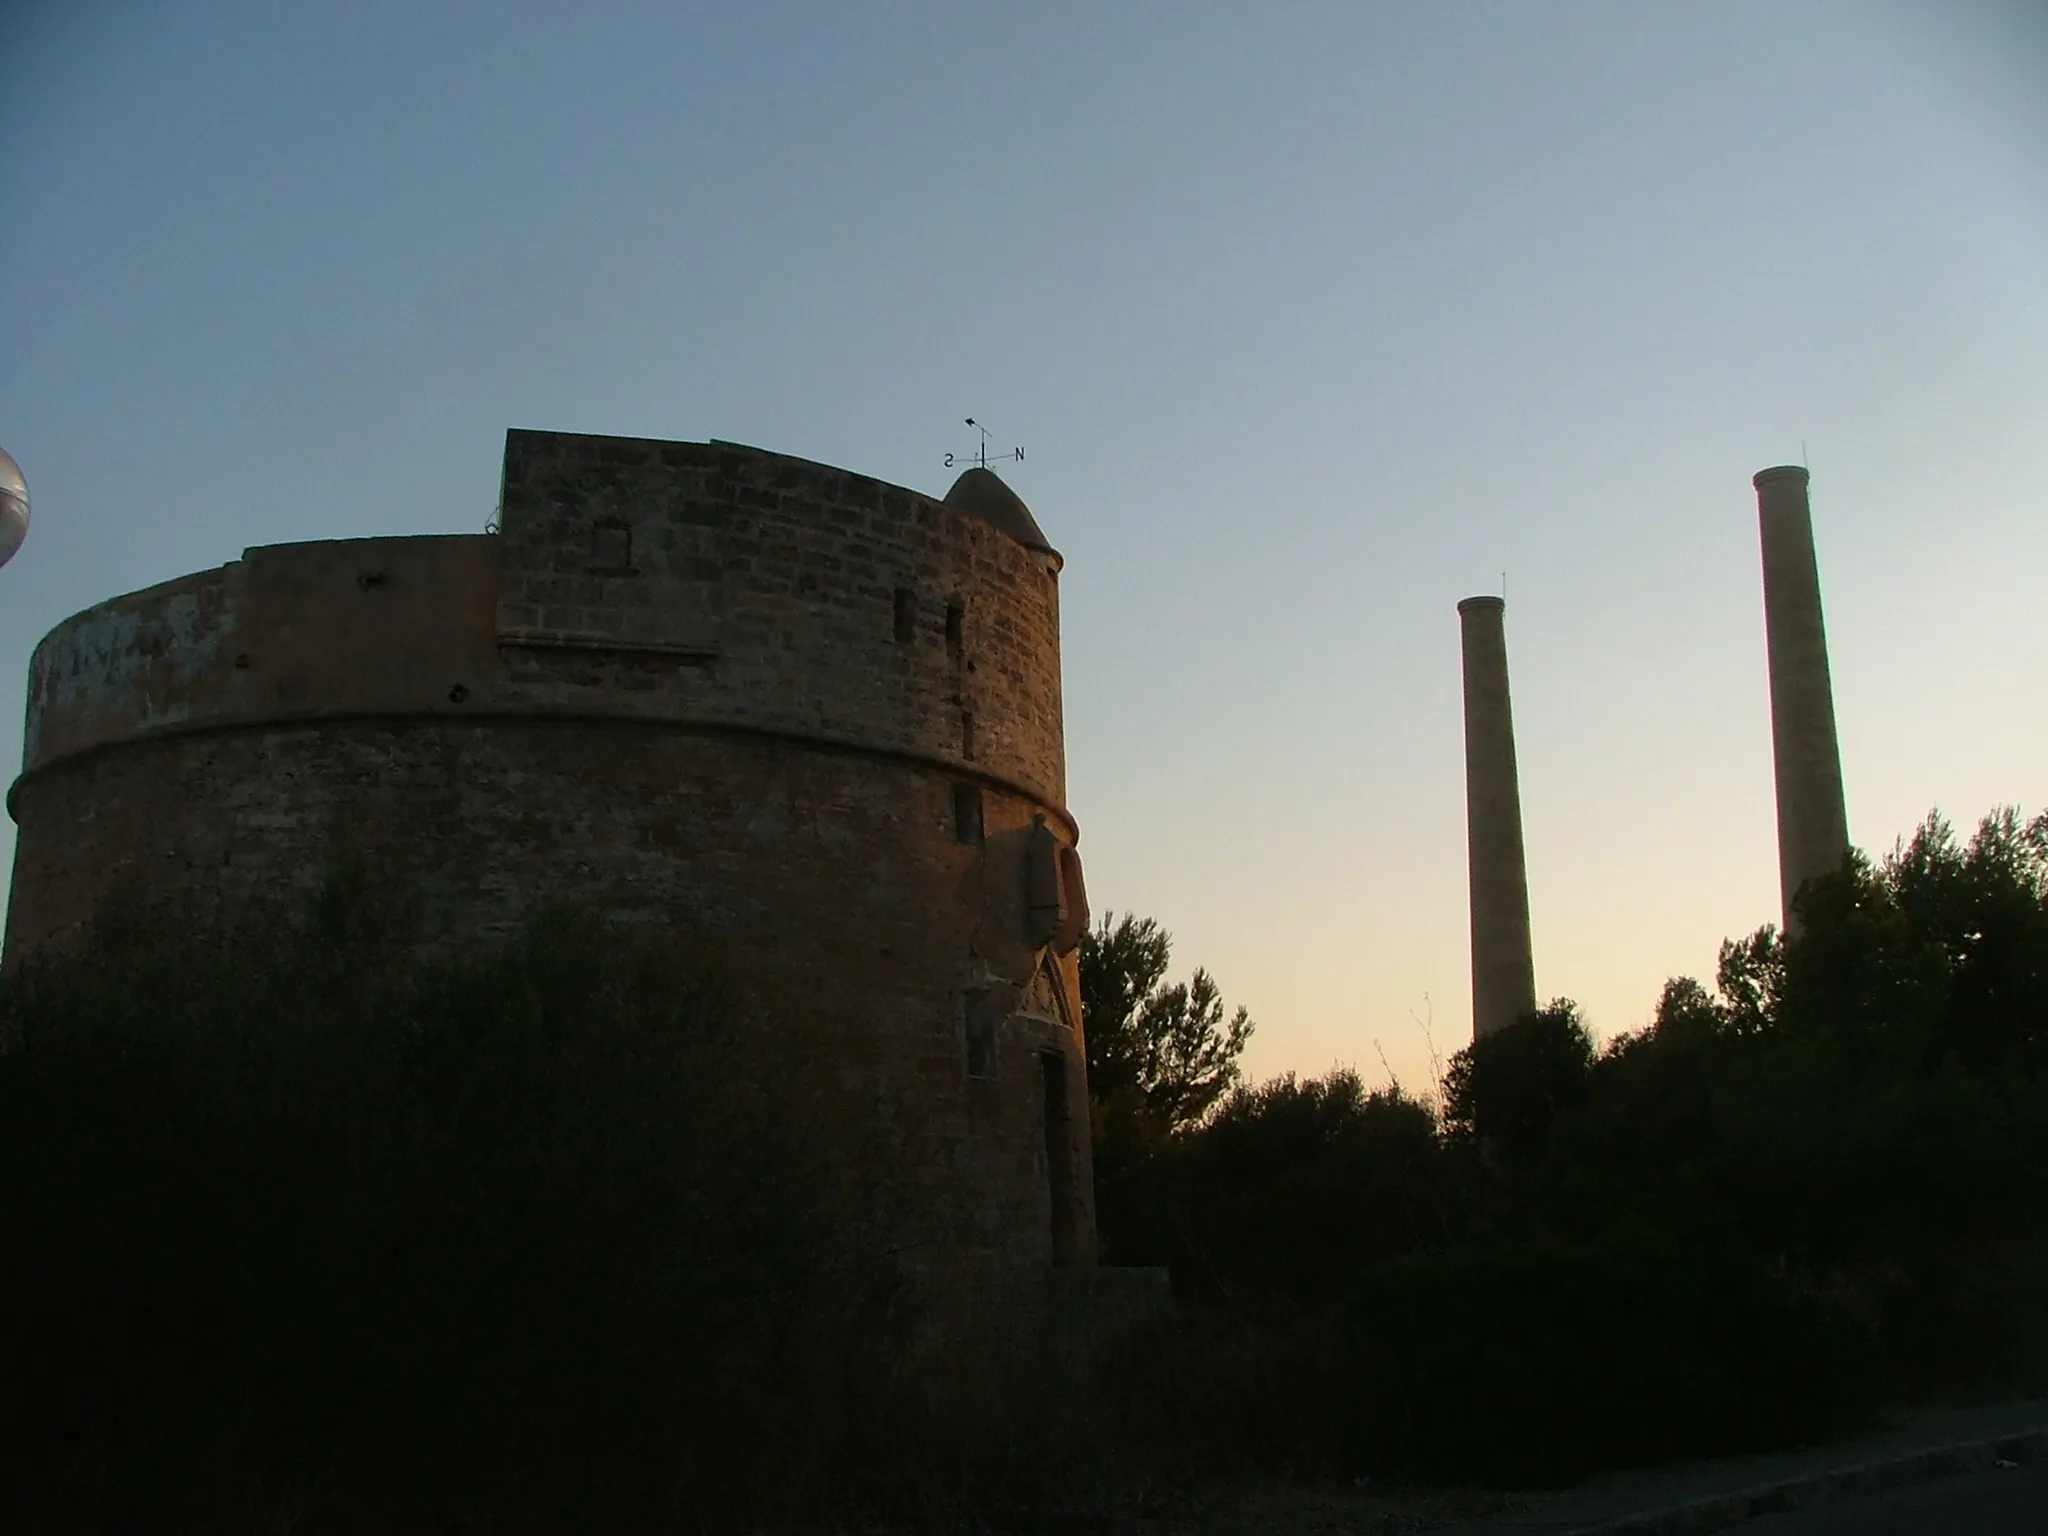 Photo showing: Silhouette of modern and old towers in Alcanada, Alcudia, Mallorca, Spain

This is a photo of a monument indexed in the Spanish heritage register of Bienes de Interés Cultural under the reference RI-51-0008327.